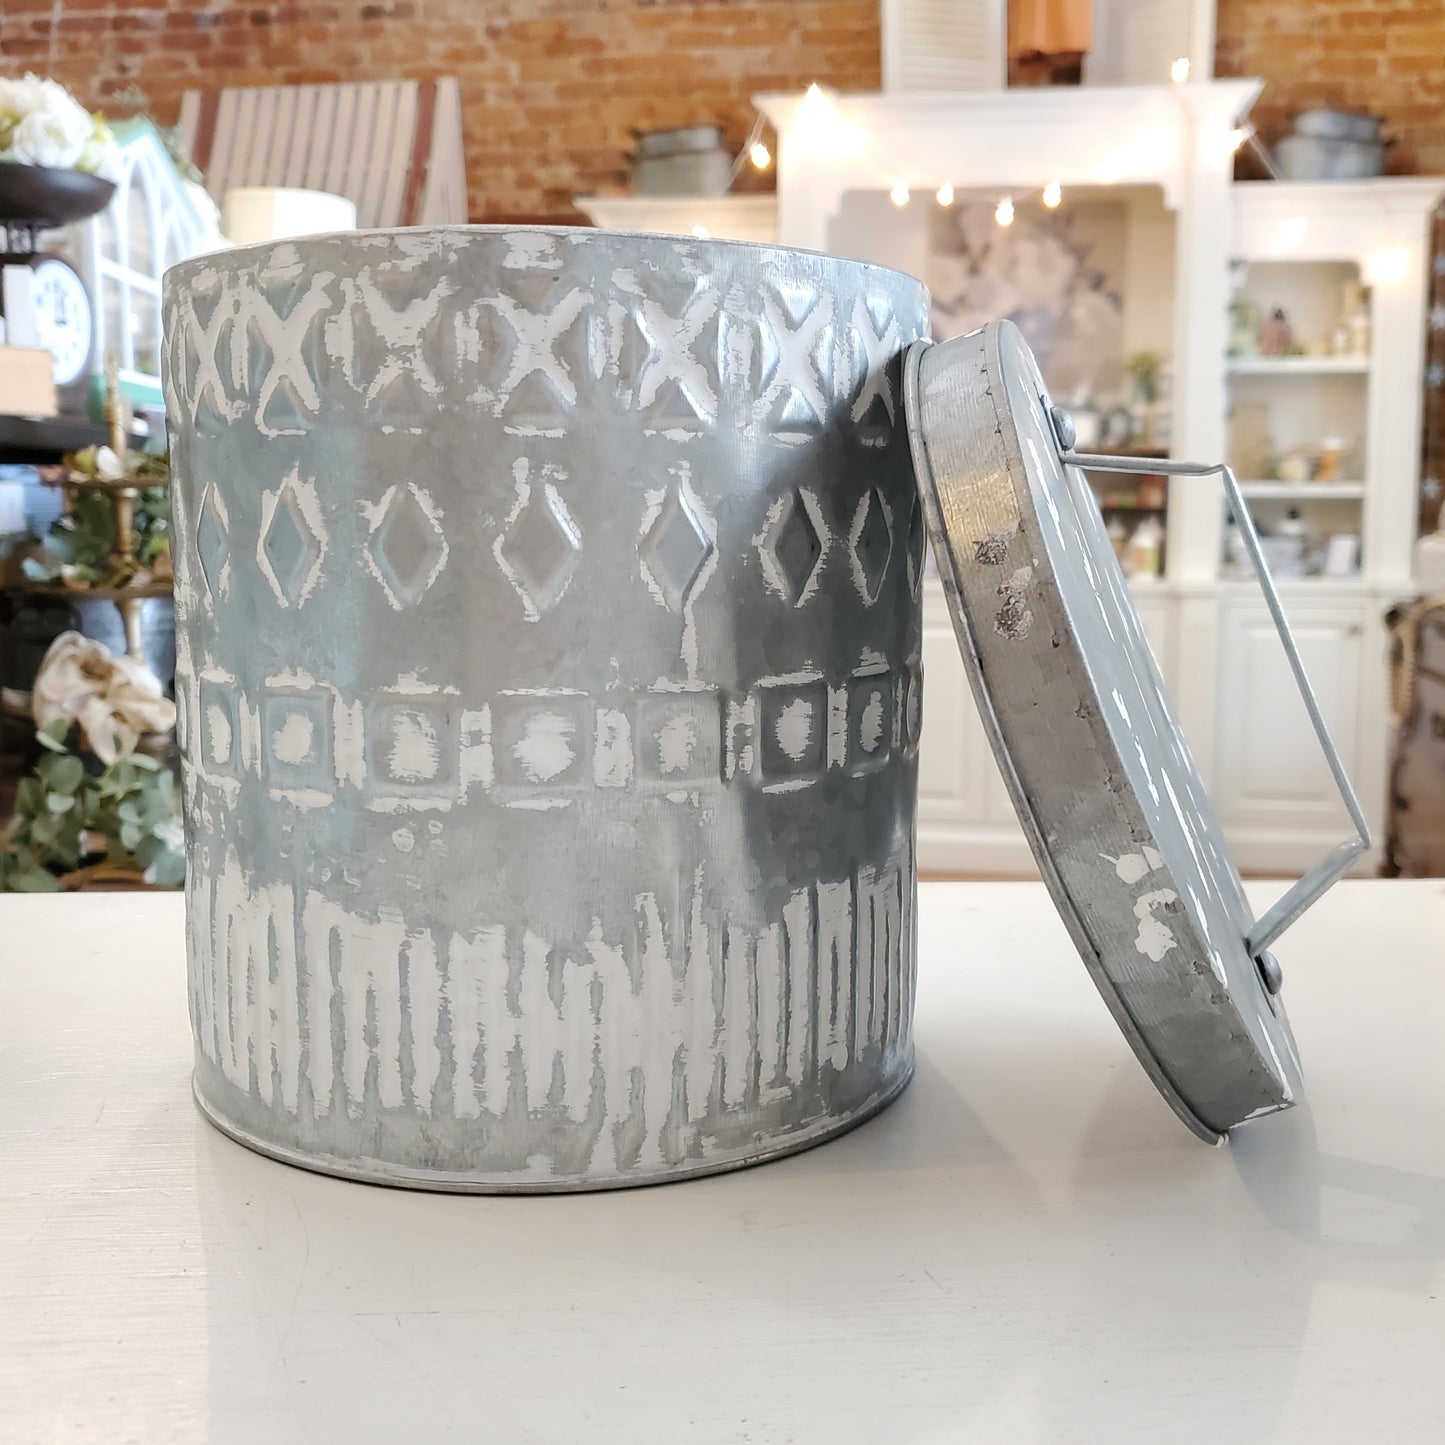 Boho Patterned Canisters